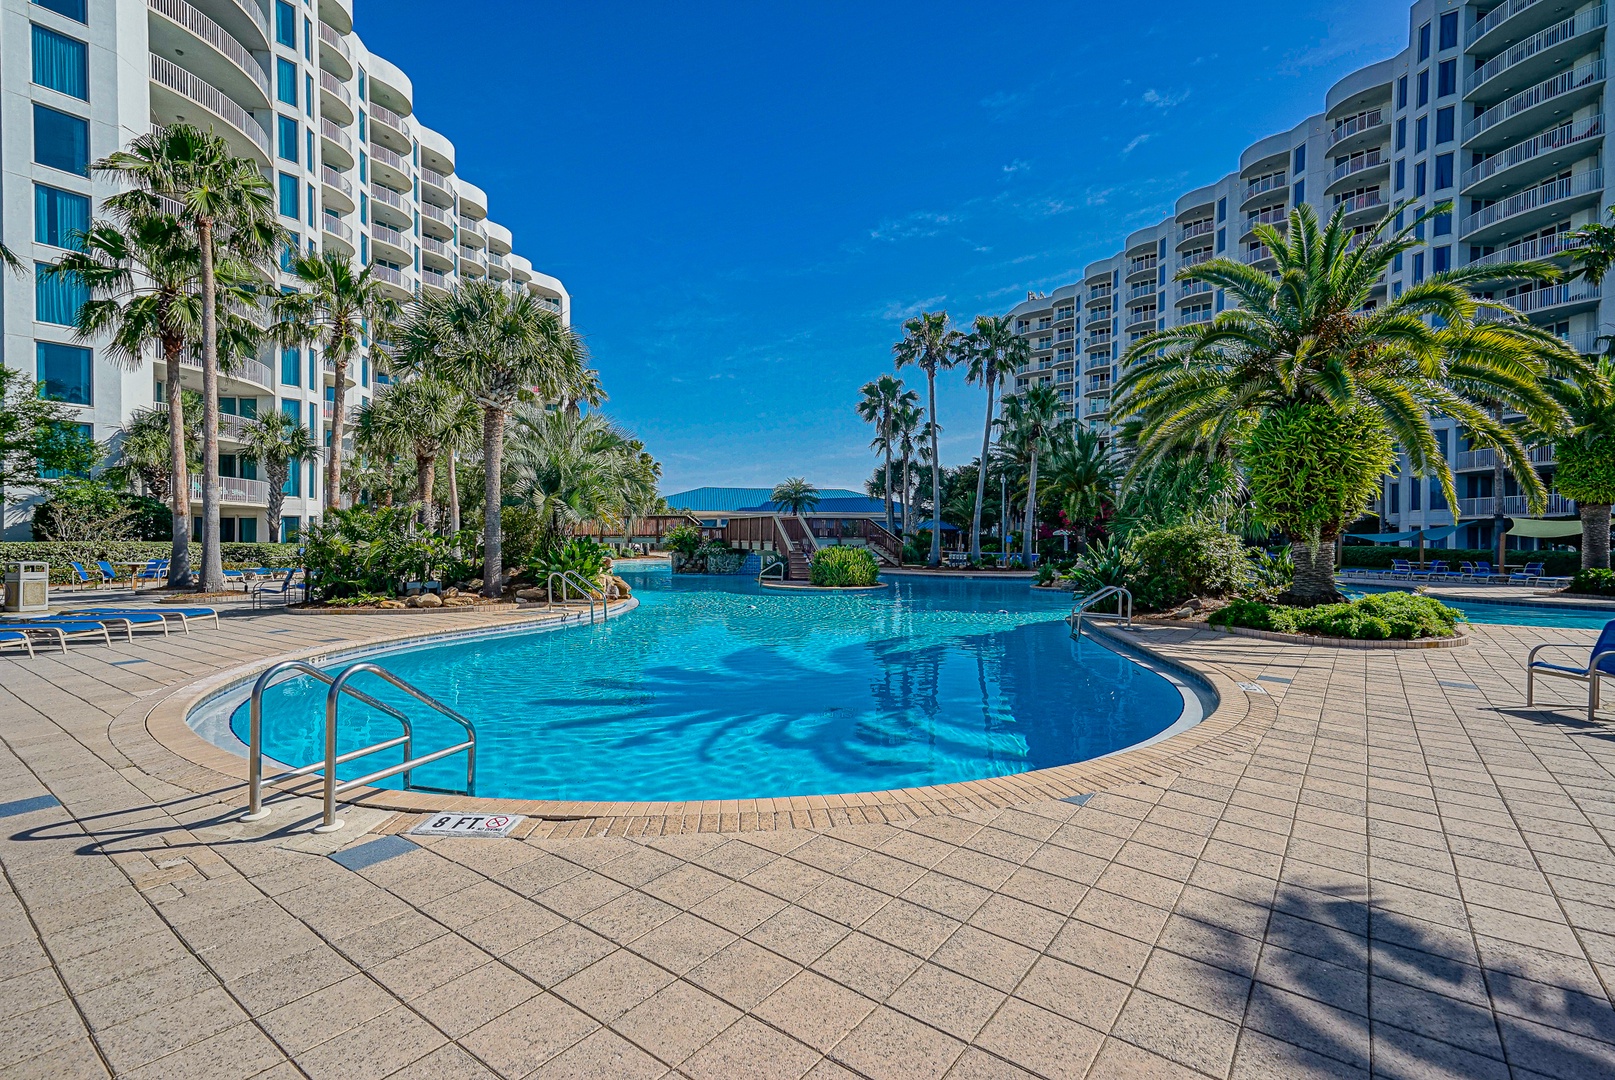 Make a splash or relax the day away at the sparkling communal pool